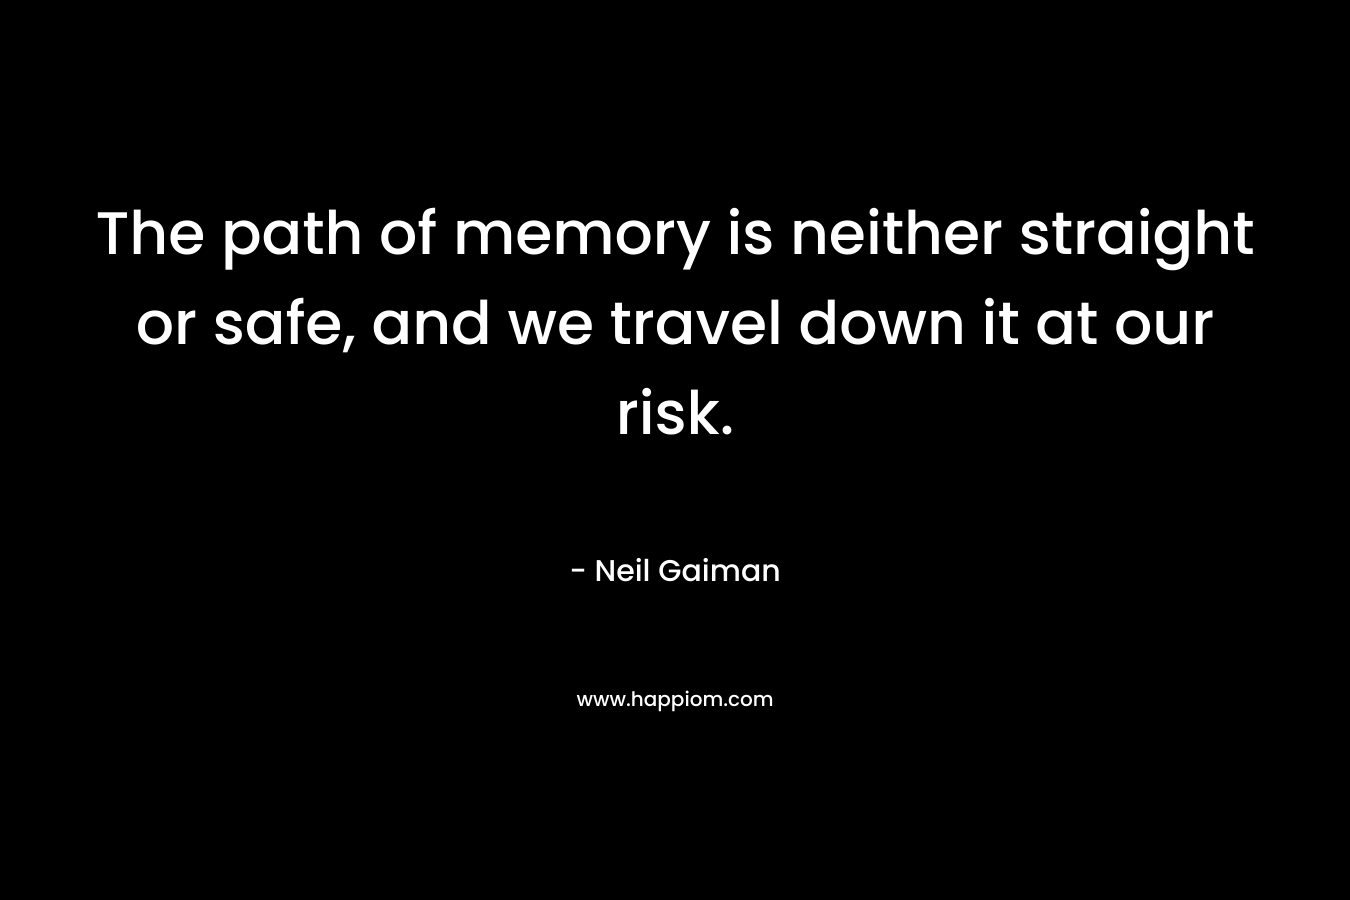 The path of memory is neither straight or safe, and we travel down it at our risk.